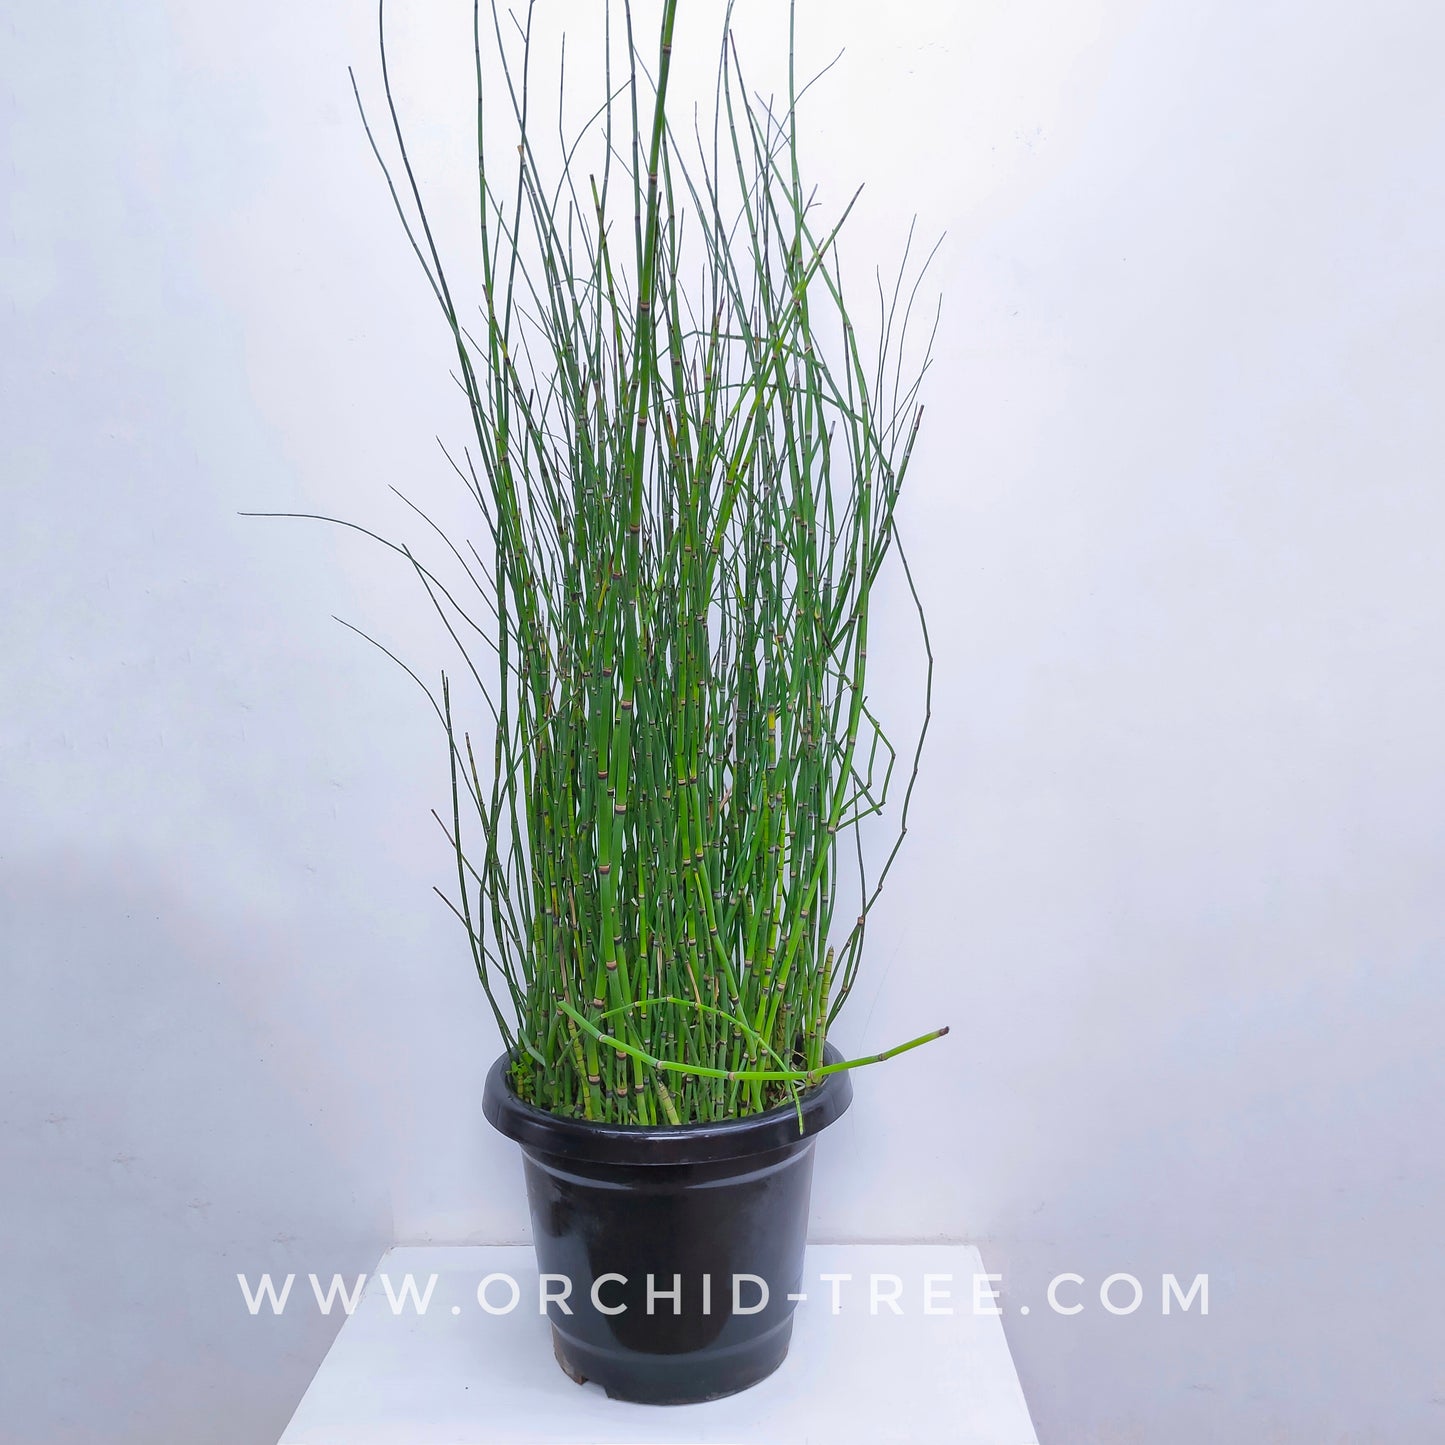 Water Bamboo - Buy Orchids Plants Online by Orchid-Tree.com